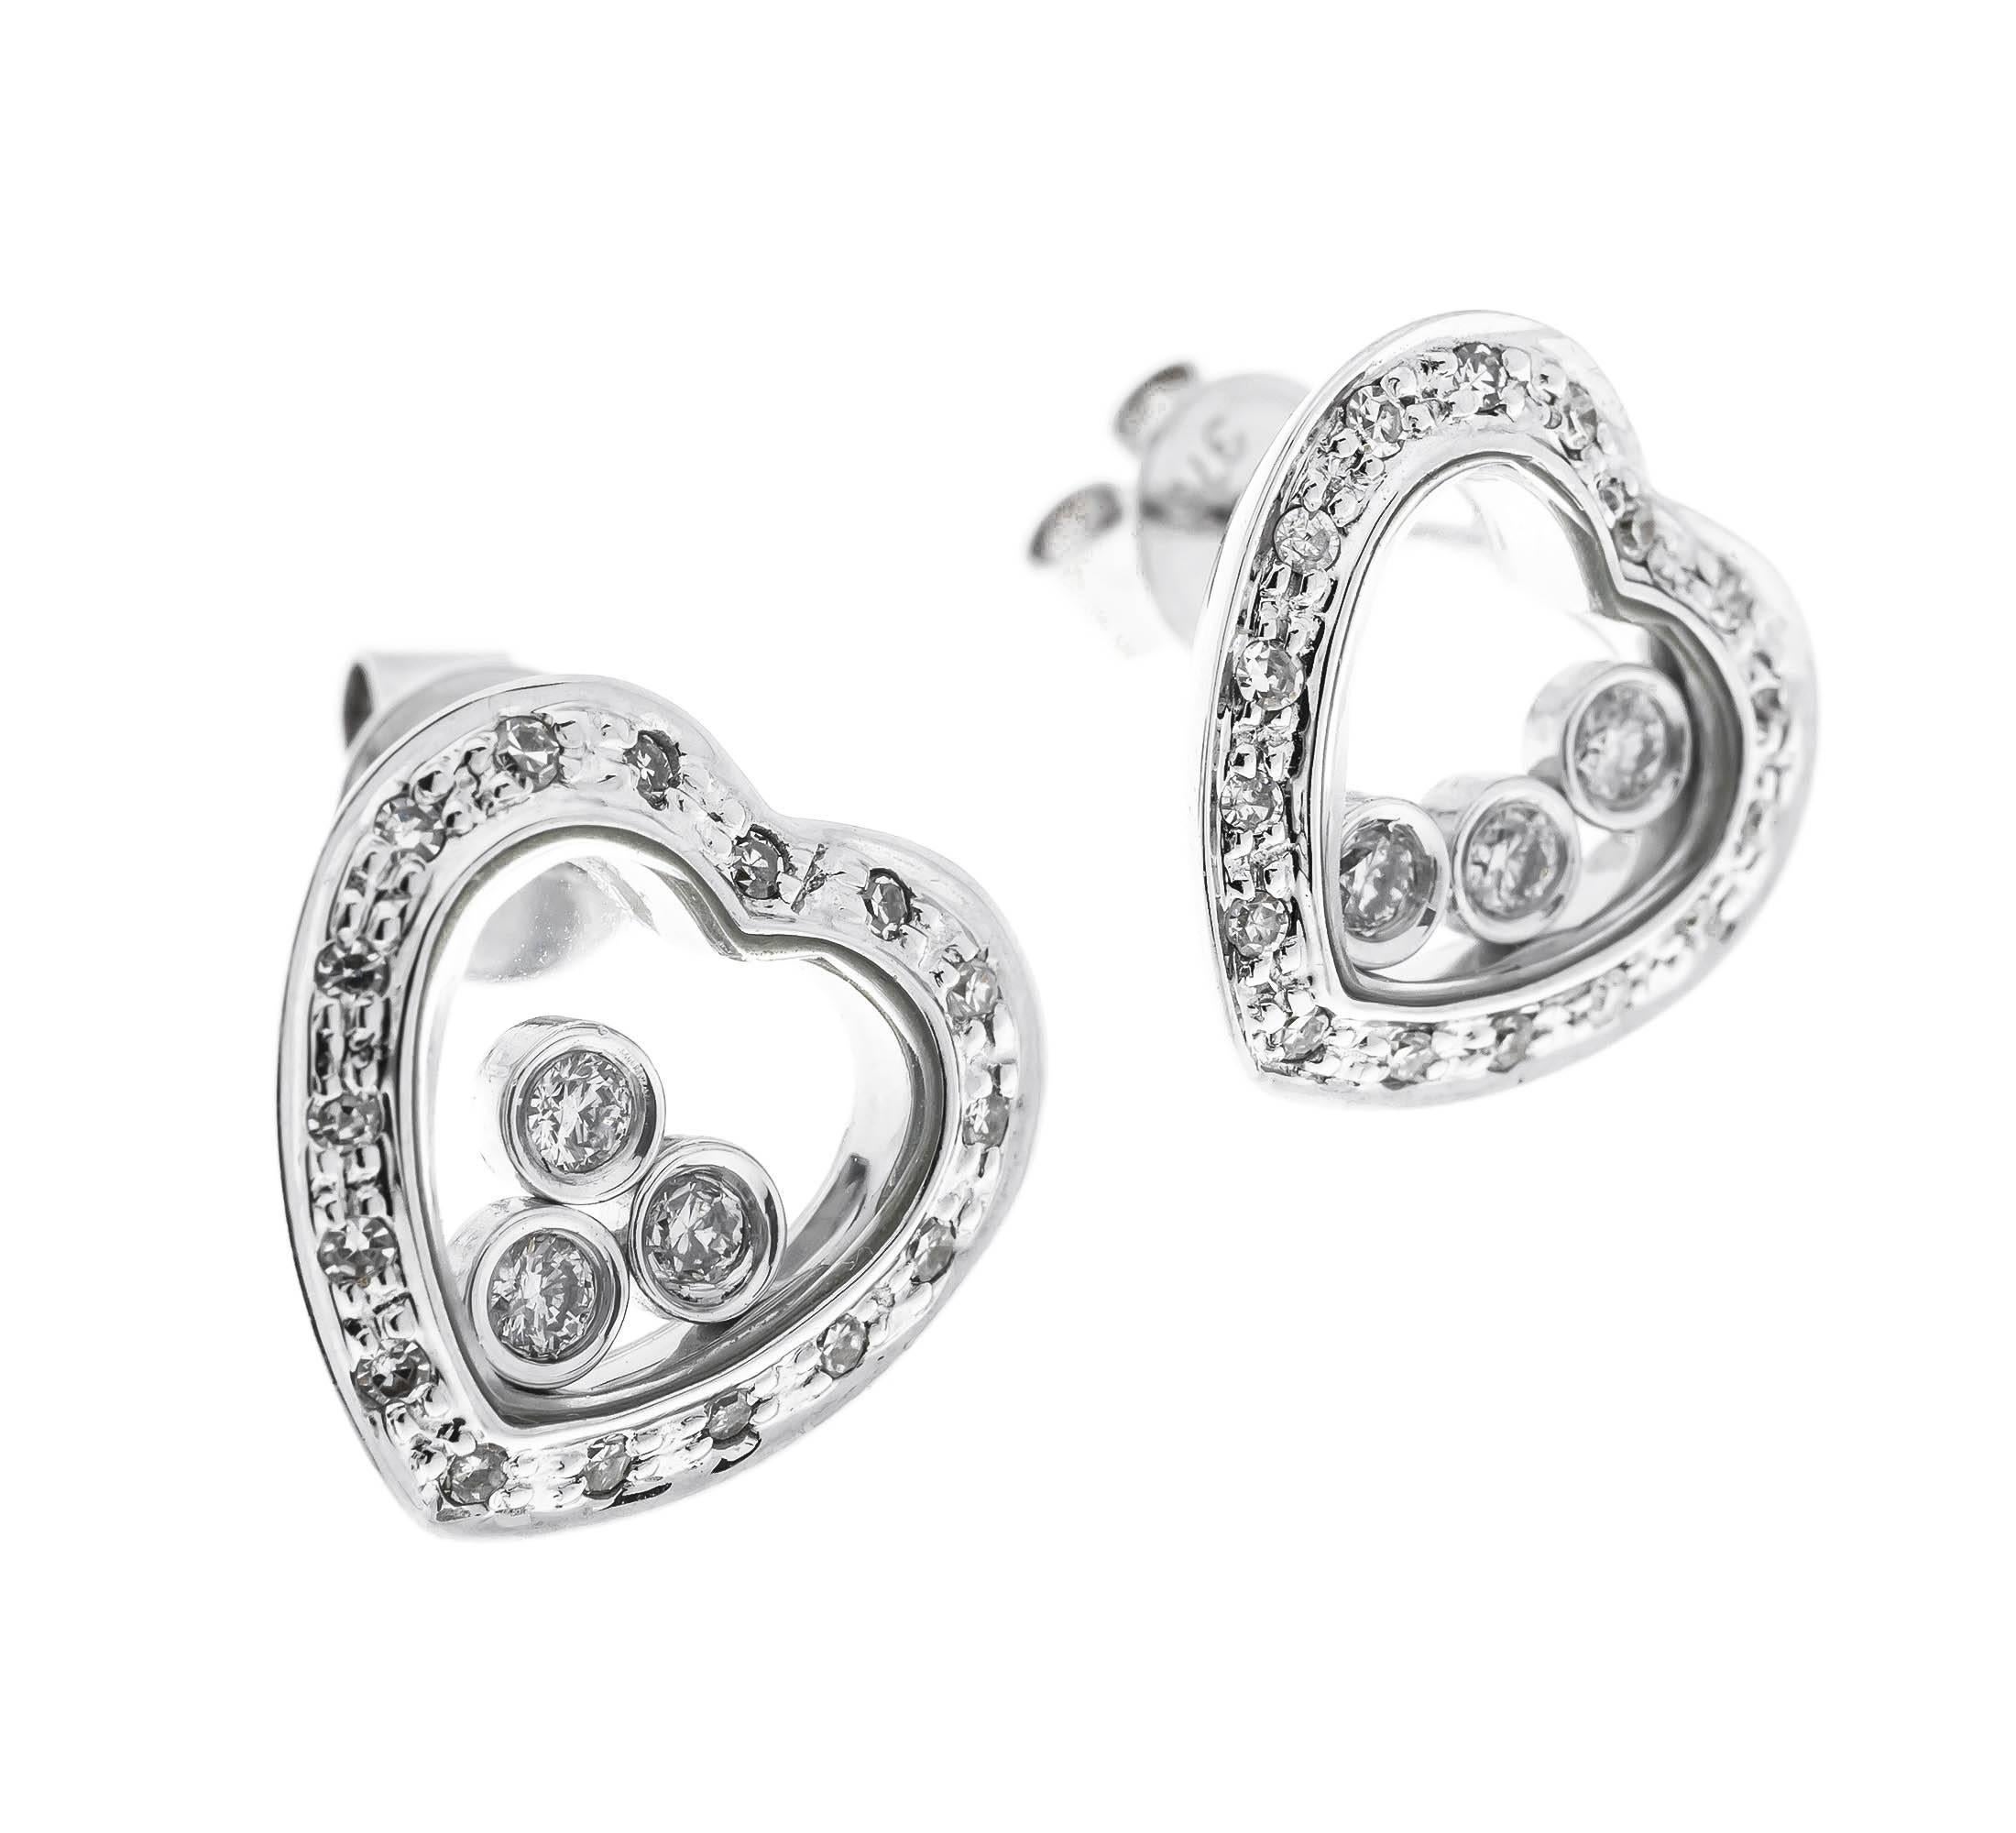 GEMMOLOGIST'S NOTES
These fabulous earrings, inspired by a Swiss designer.

Designed as a twinkling diamond heart, surrounding a glazed panel, that encases three freely moving diamonds. 

A gorgeous playful pair fo earrings, that are the perfect